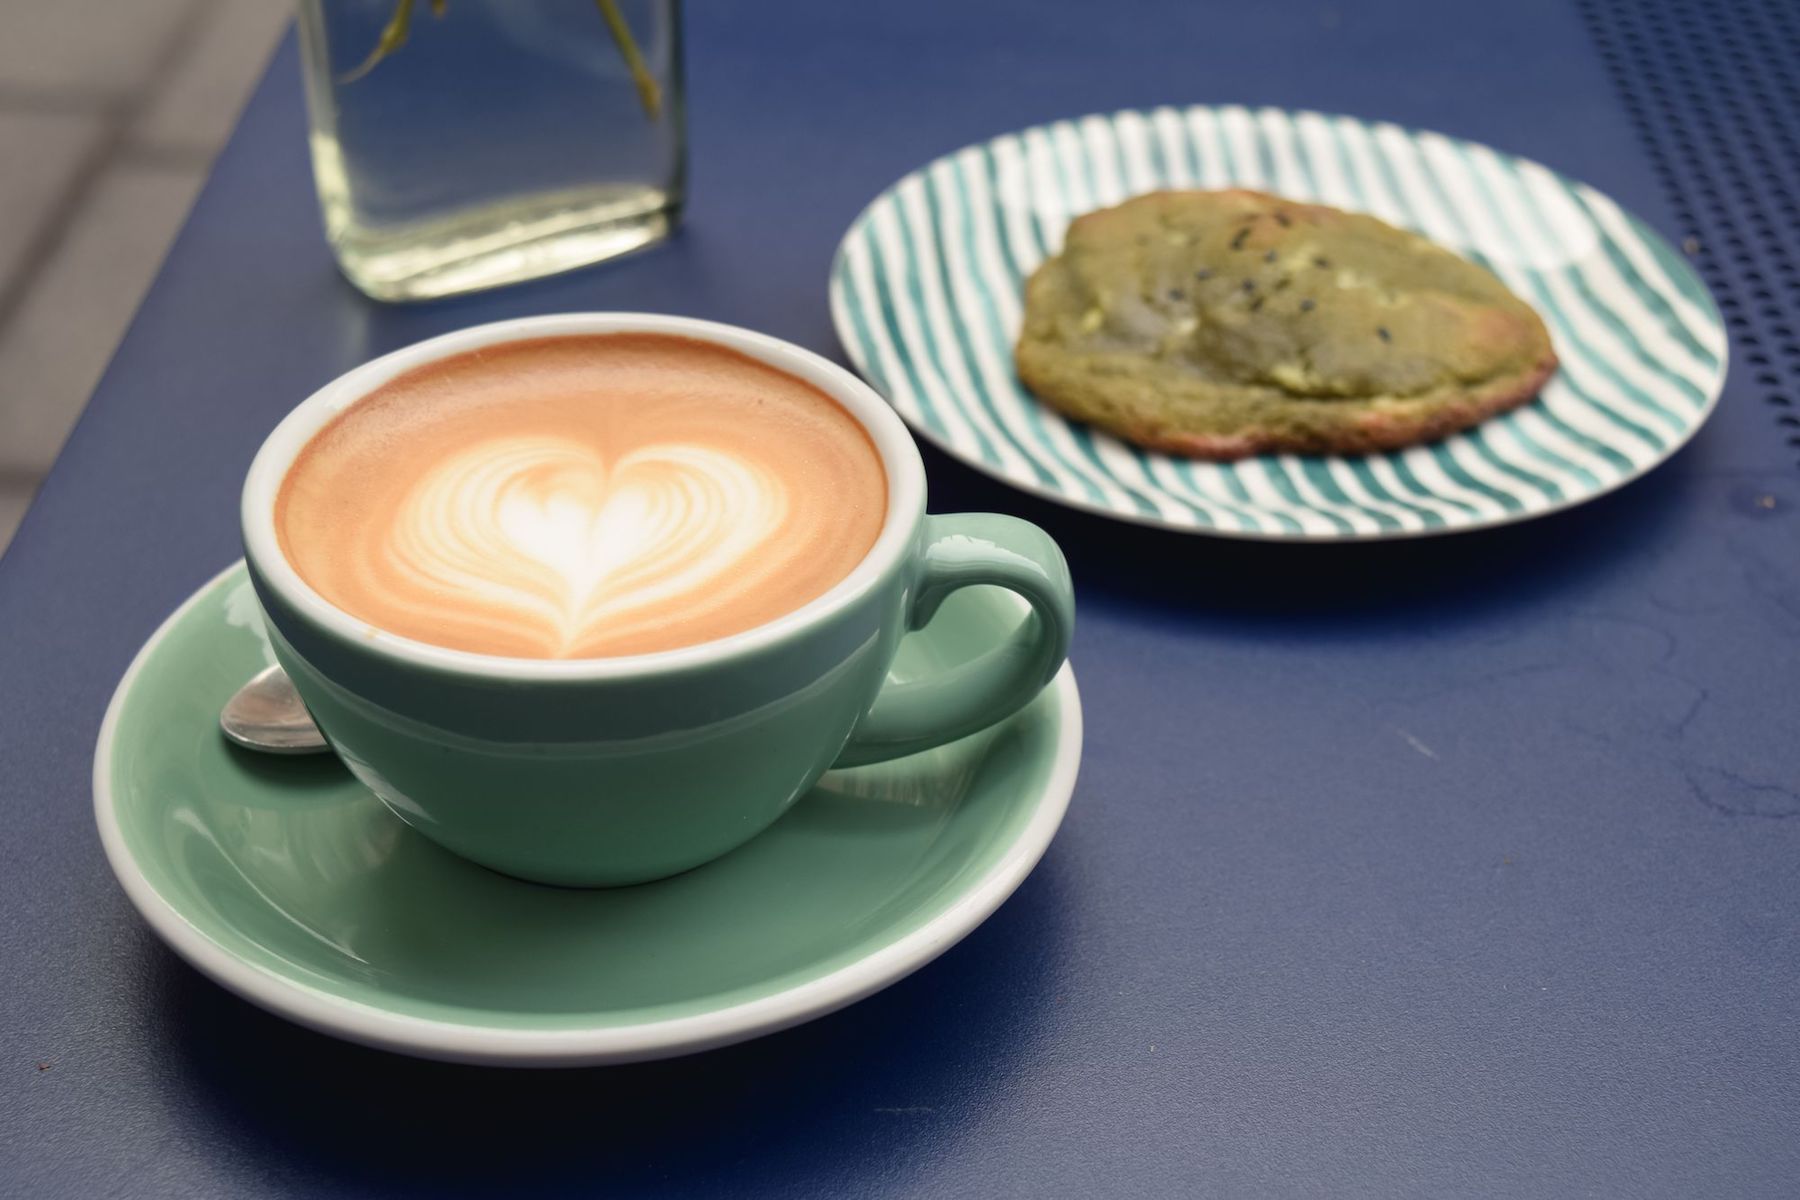 Specialty Coffee and Matcha White Chocolate Cookie at 5 Pailles Coffee, Paris